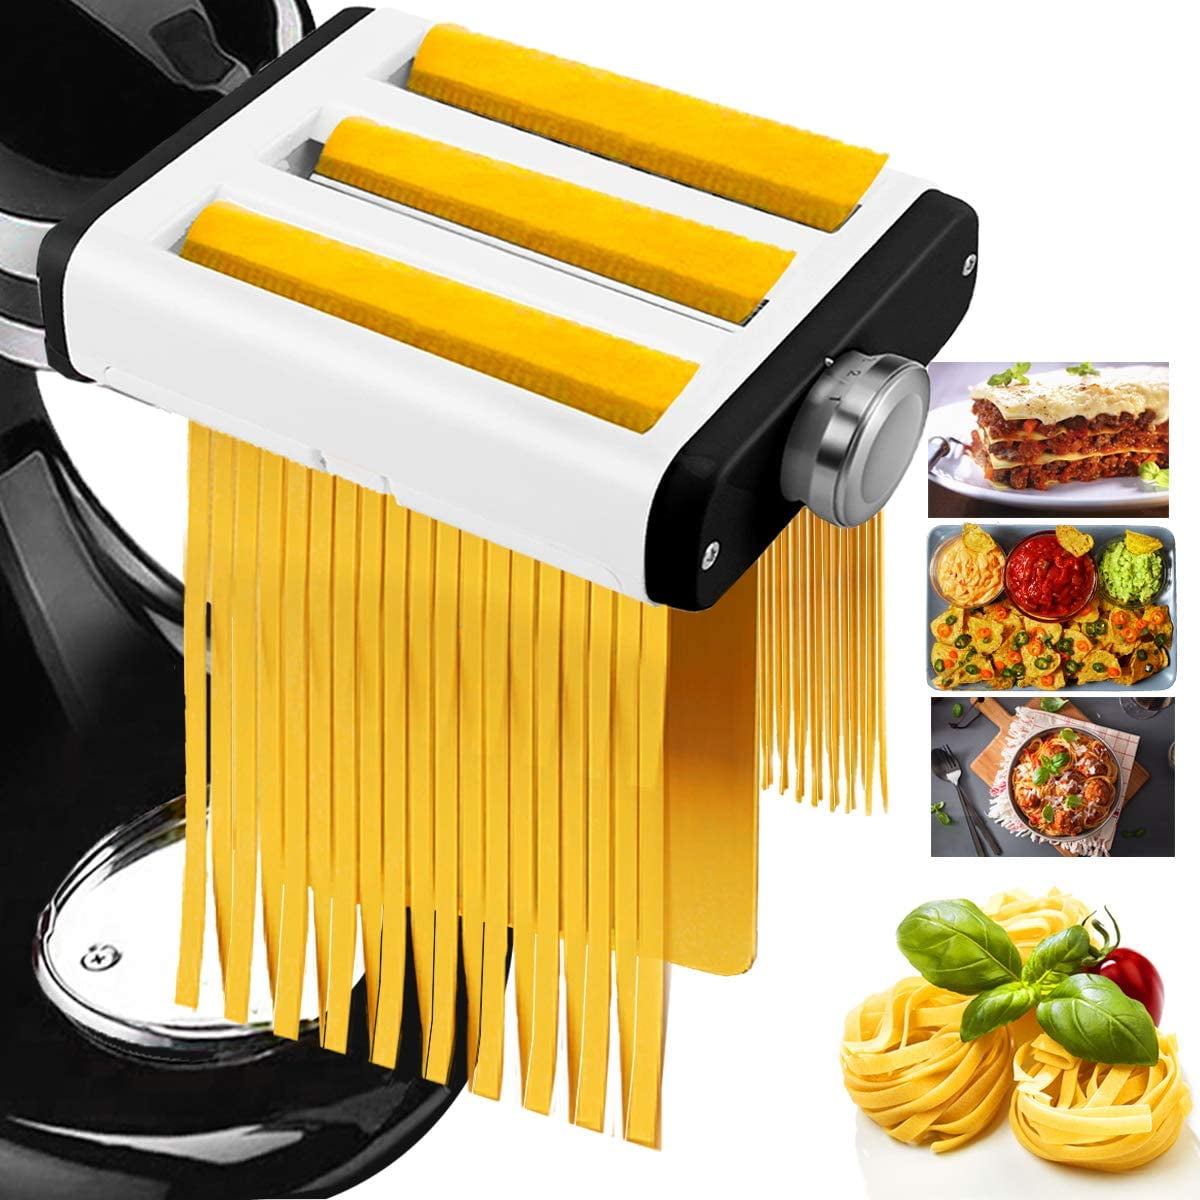 VEVOR Pasta Maker Attachment for KitchenAid Stand Mixer, 3 in 1 Pasta Attachments Including Pasta Roller, Spaghetti Fettuccine Cutter and Cleaning